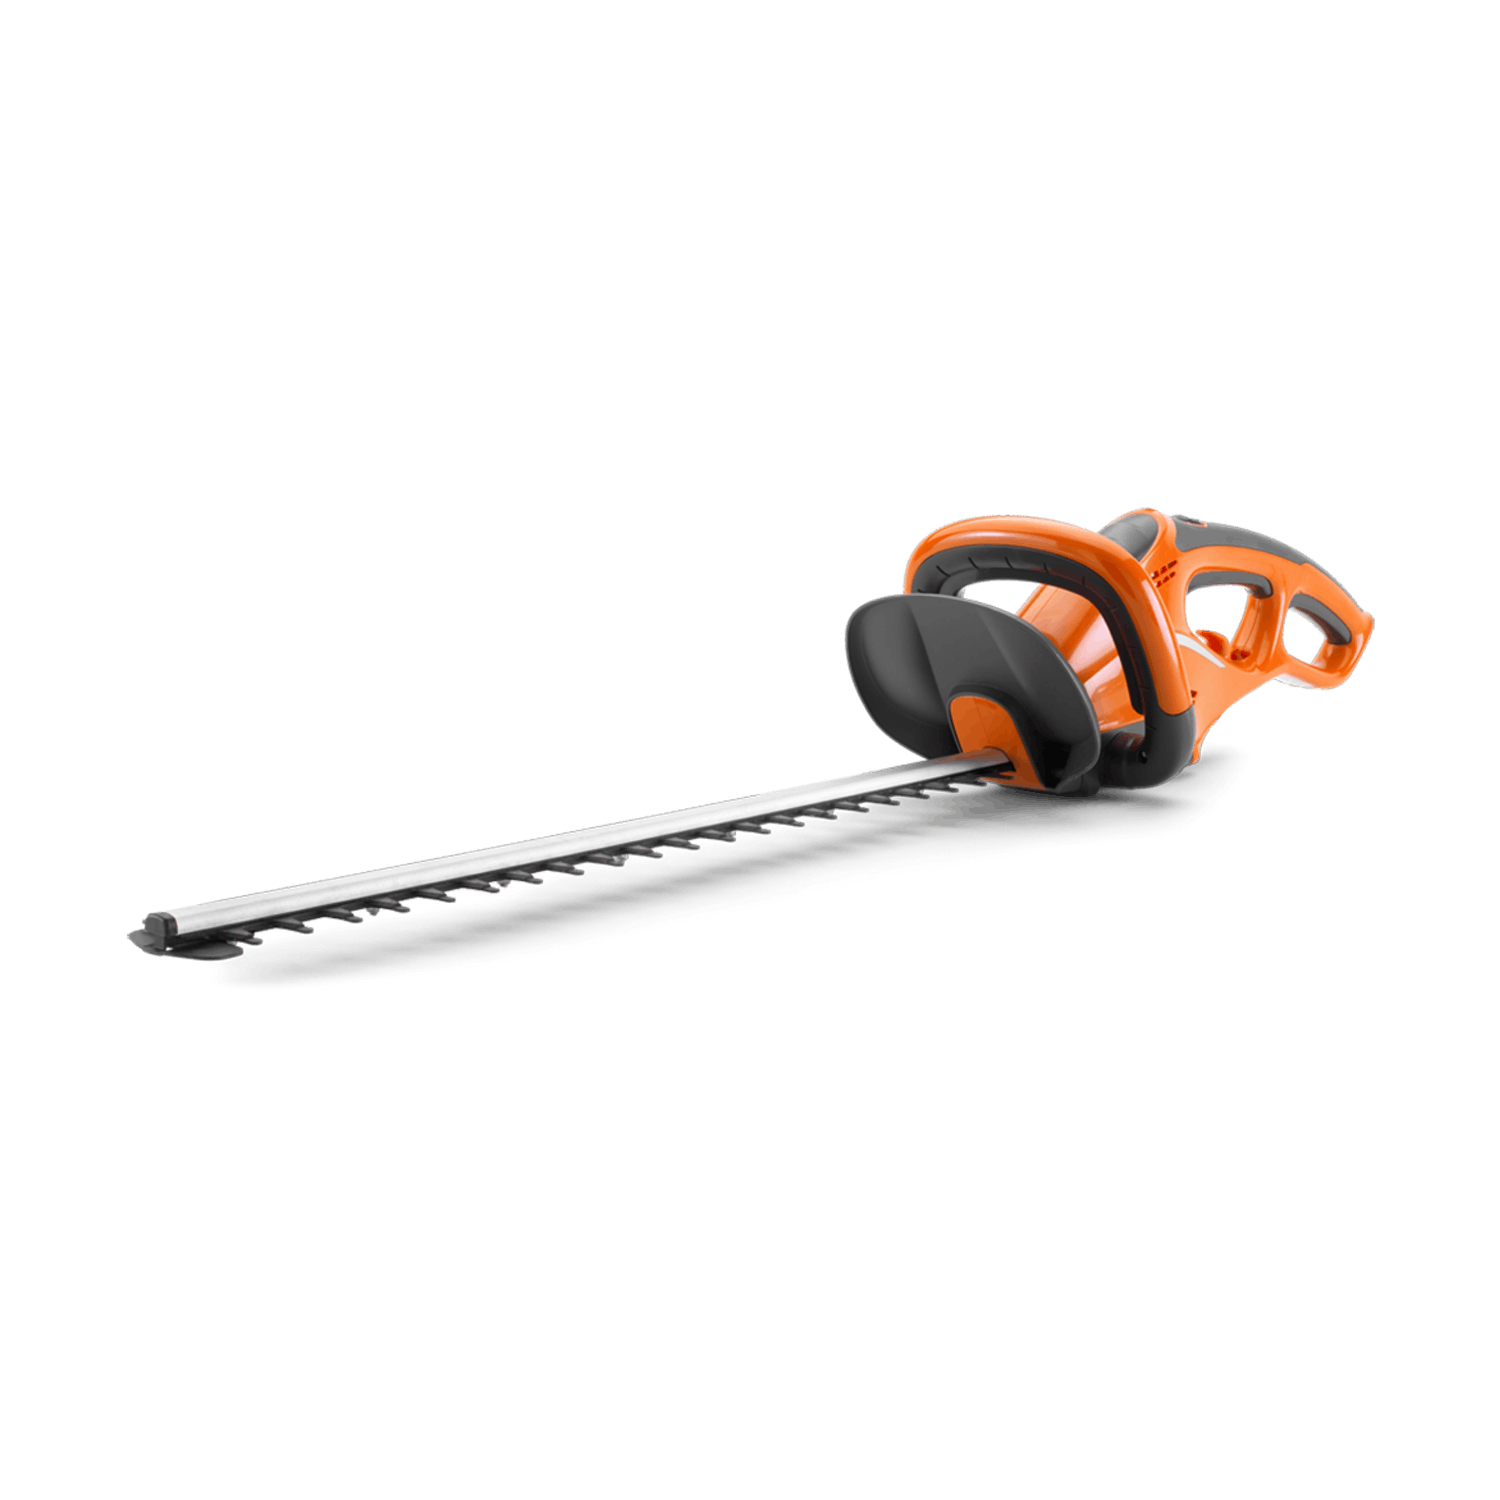 Photos - Other for Computer Flymo Easi Cut 610XT Corded Hedge Trimmer 967103001 